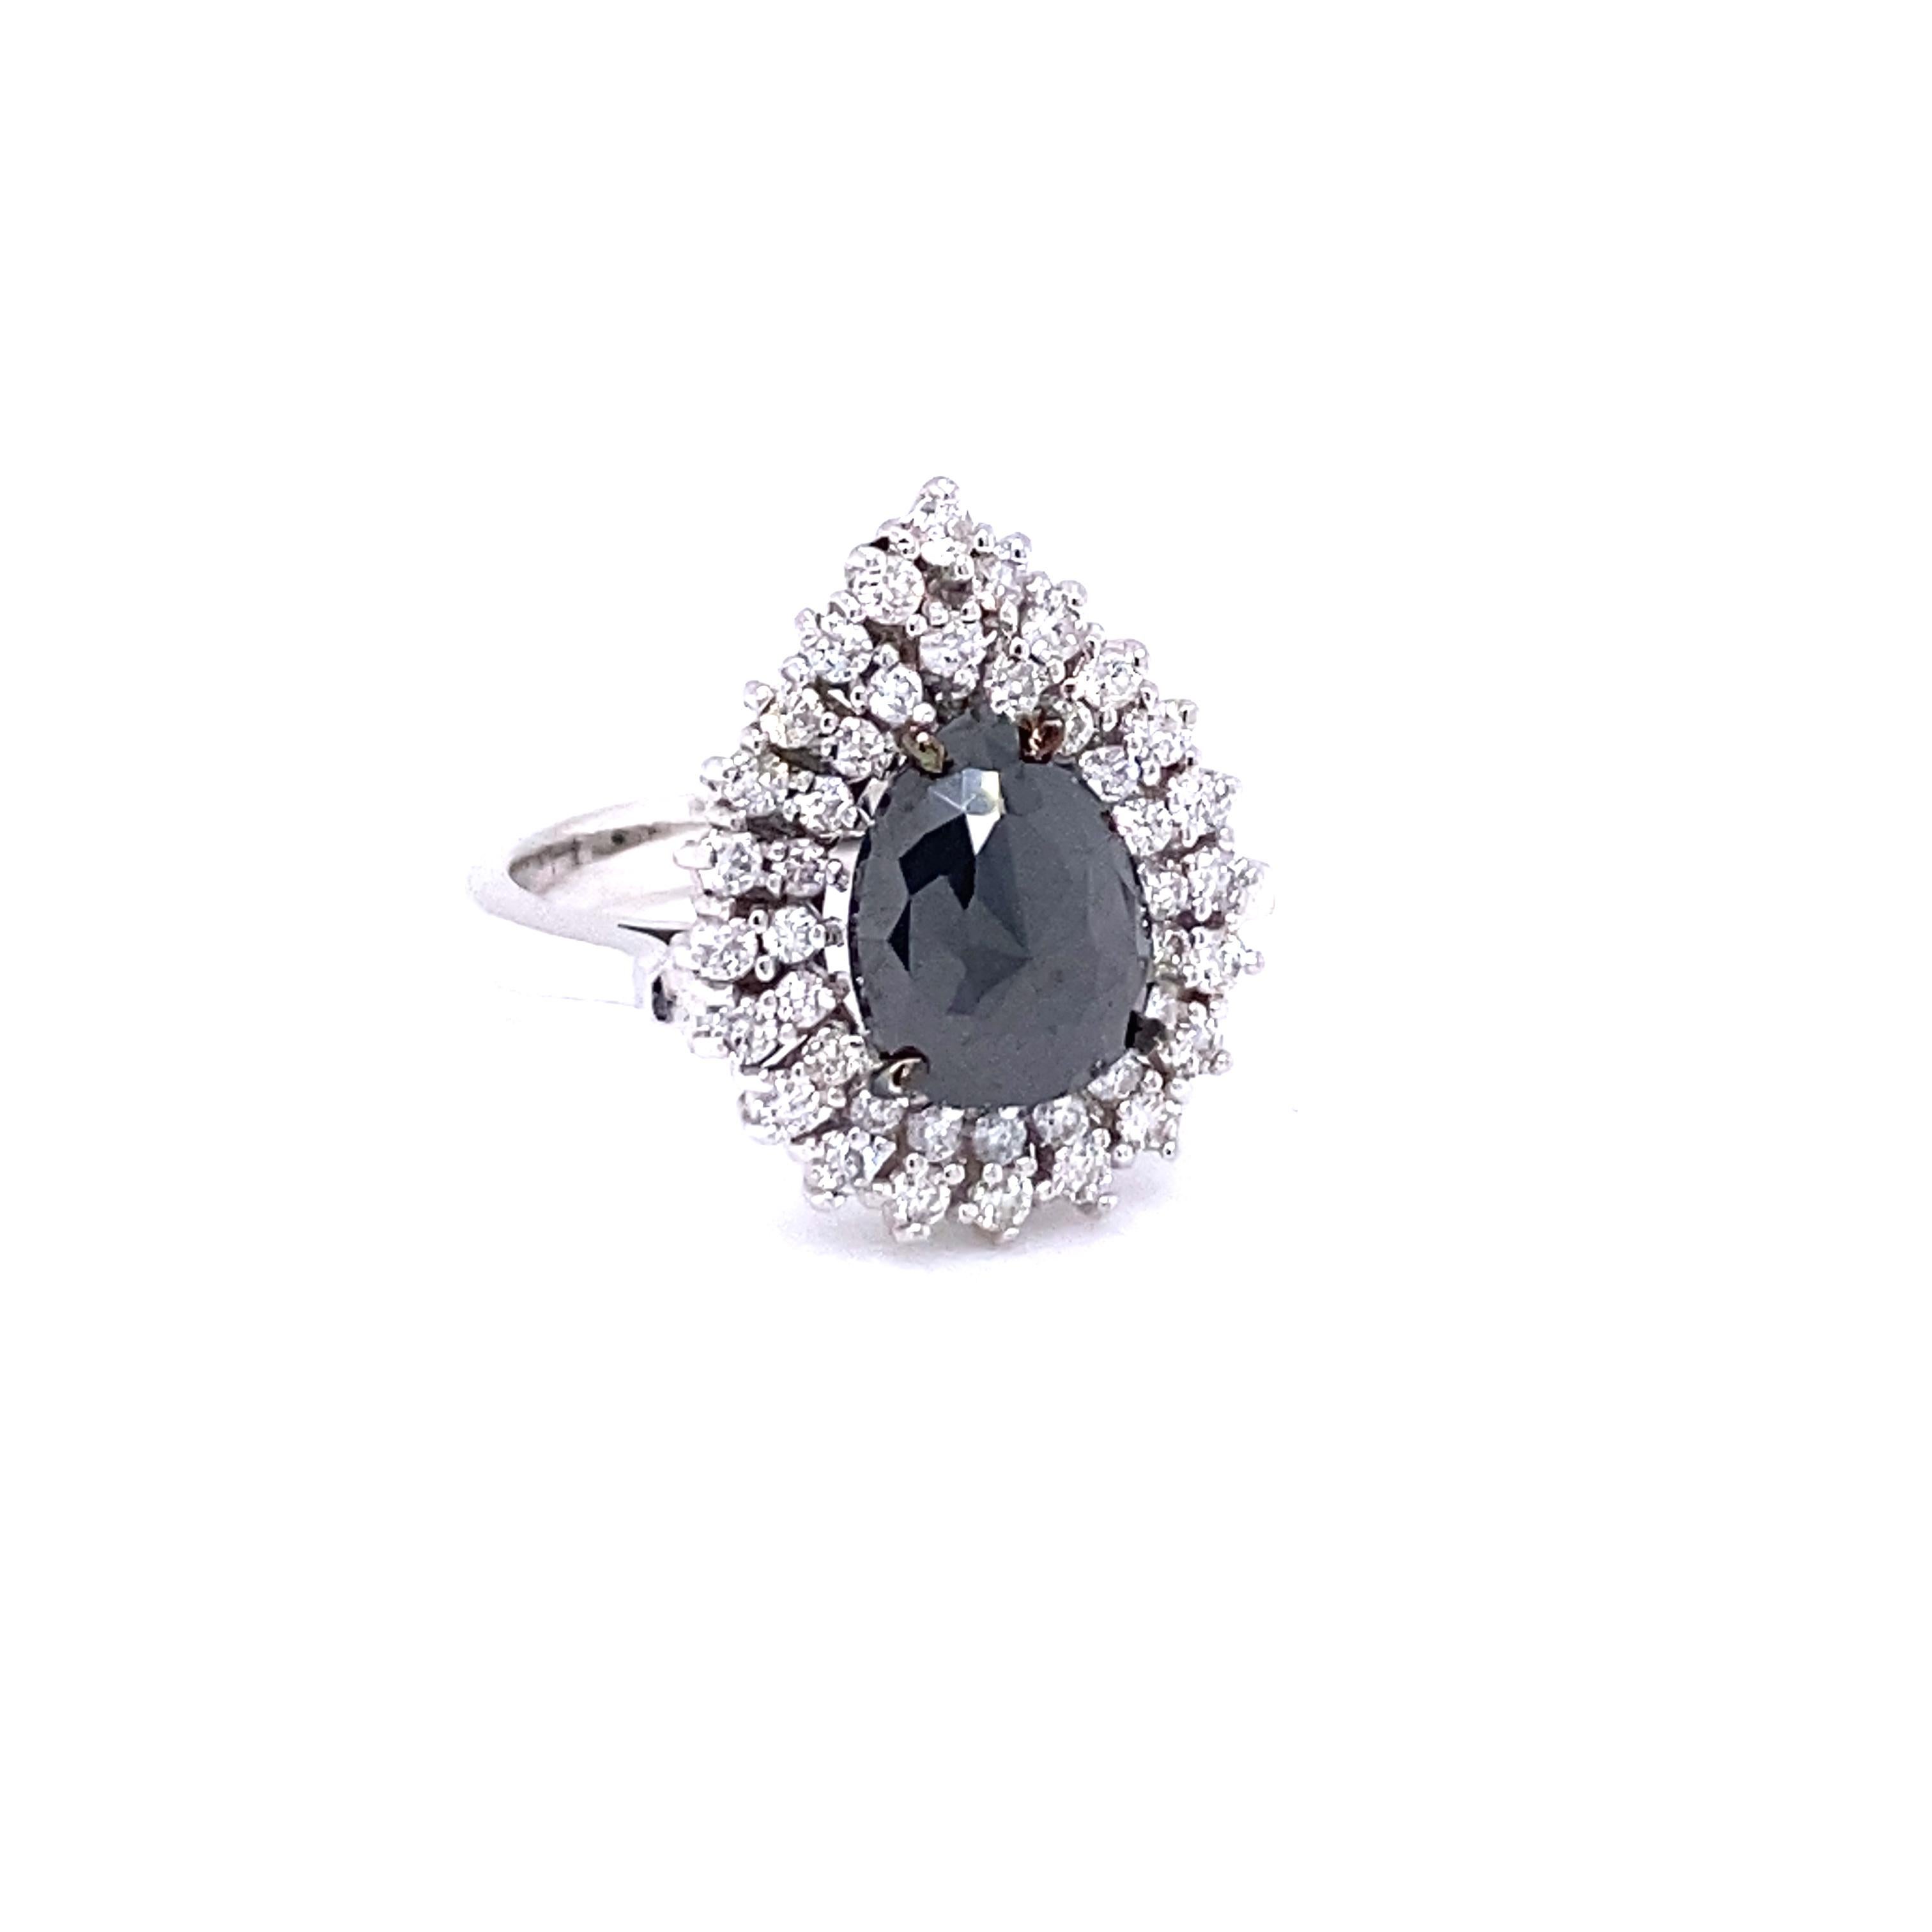 Stunning Pear Cut Black and White Diamond  Bridal Ring
Description as follows:

Pear Cut Dia weighs 2.32 carats
43 Round Cut Diamonds weigh 0.69 carats (Clarity: SI, Color: F)
14 Karat White Gold approximately 5.3 grams
Ring Size: 7 (complimentary